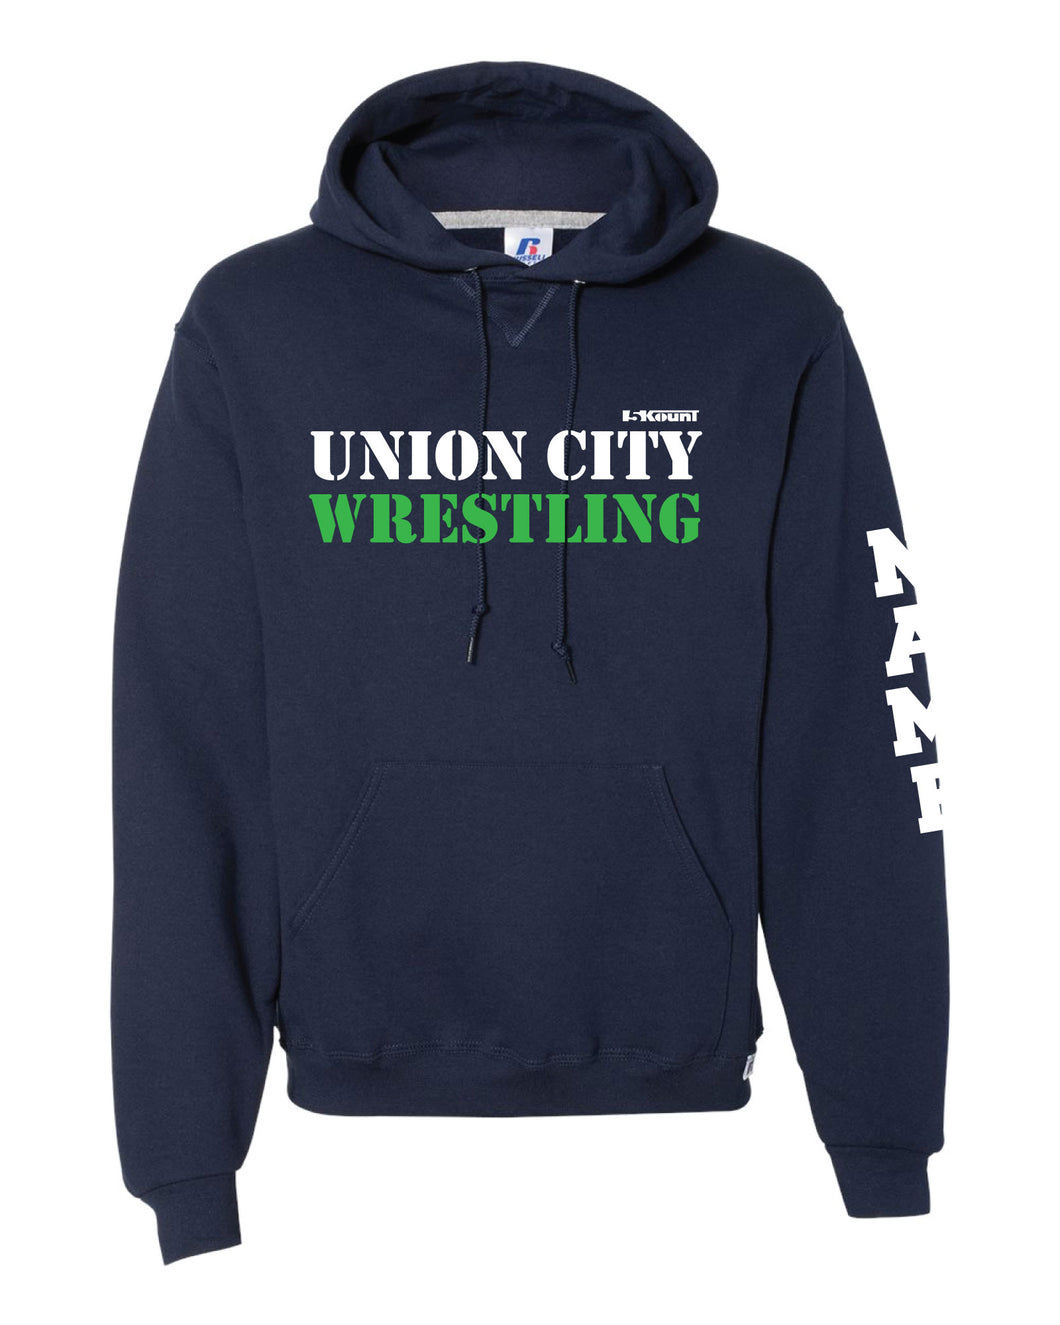 Union City Wrestling Russell Athletic Cotton Hoodie - Navy - 5KounT2018